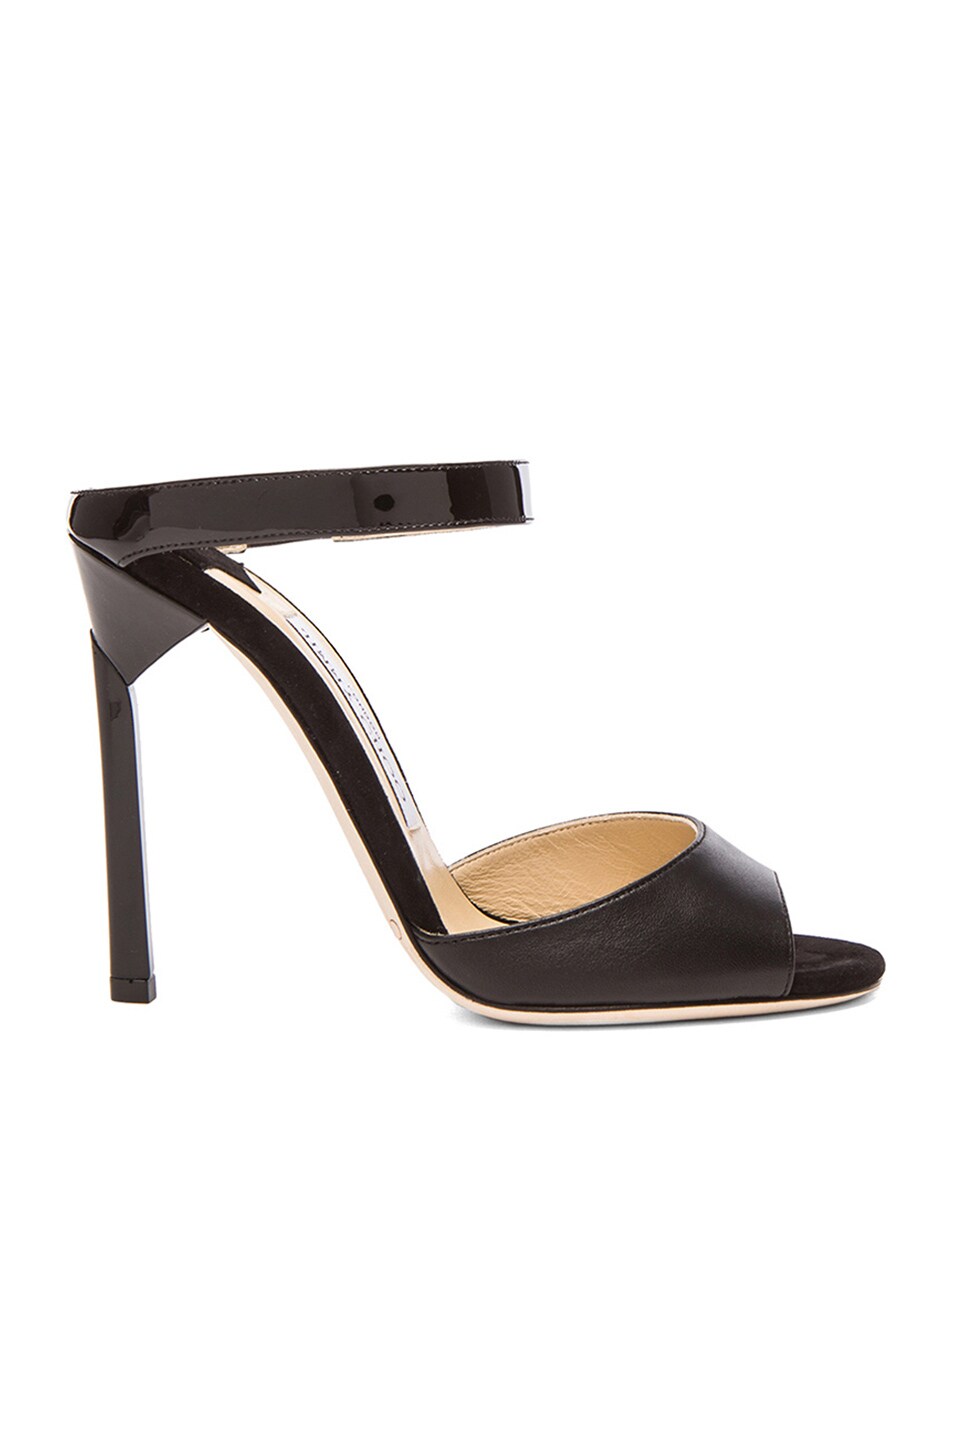 Image 1 of Jimmy Choo Deckle Leather Mules in Black